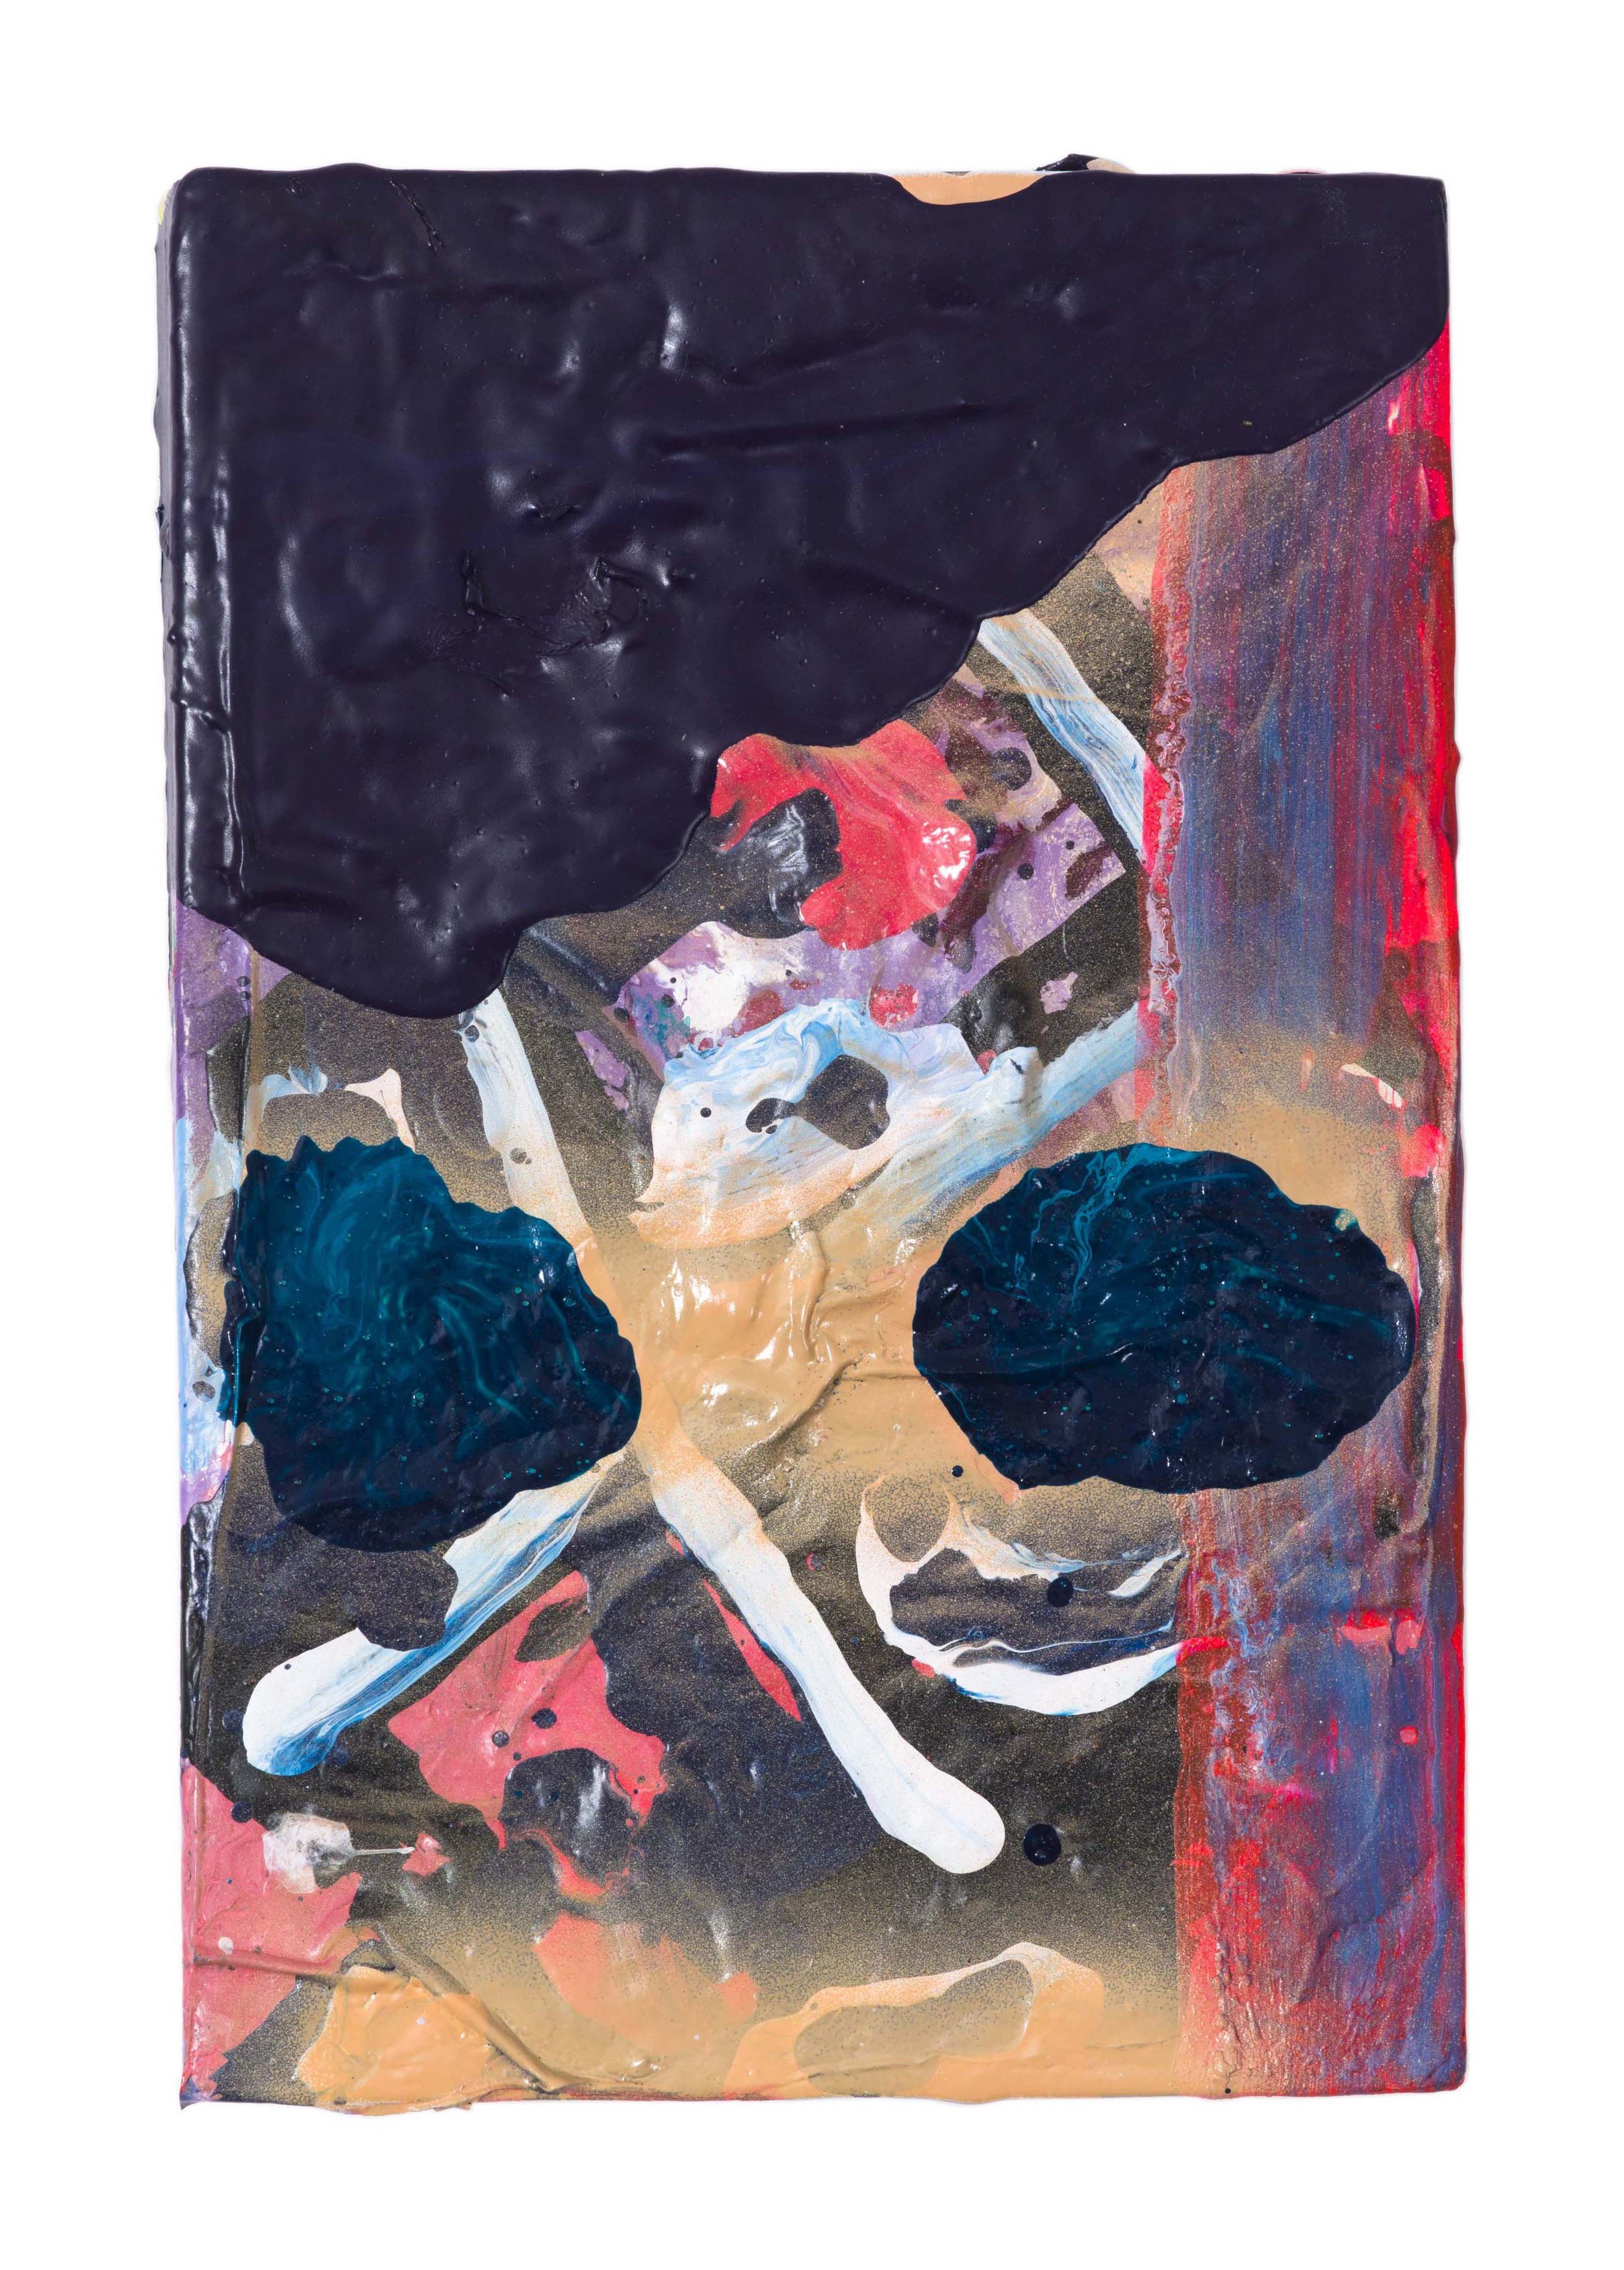  Drew Beattie and Ben Shepard  Poverty and Progress   acrylic and collage on used book 2016 8 ¼ x 5 ½ inches 